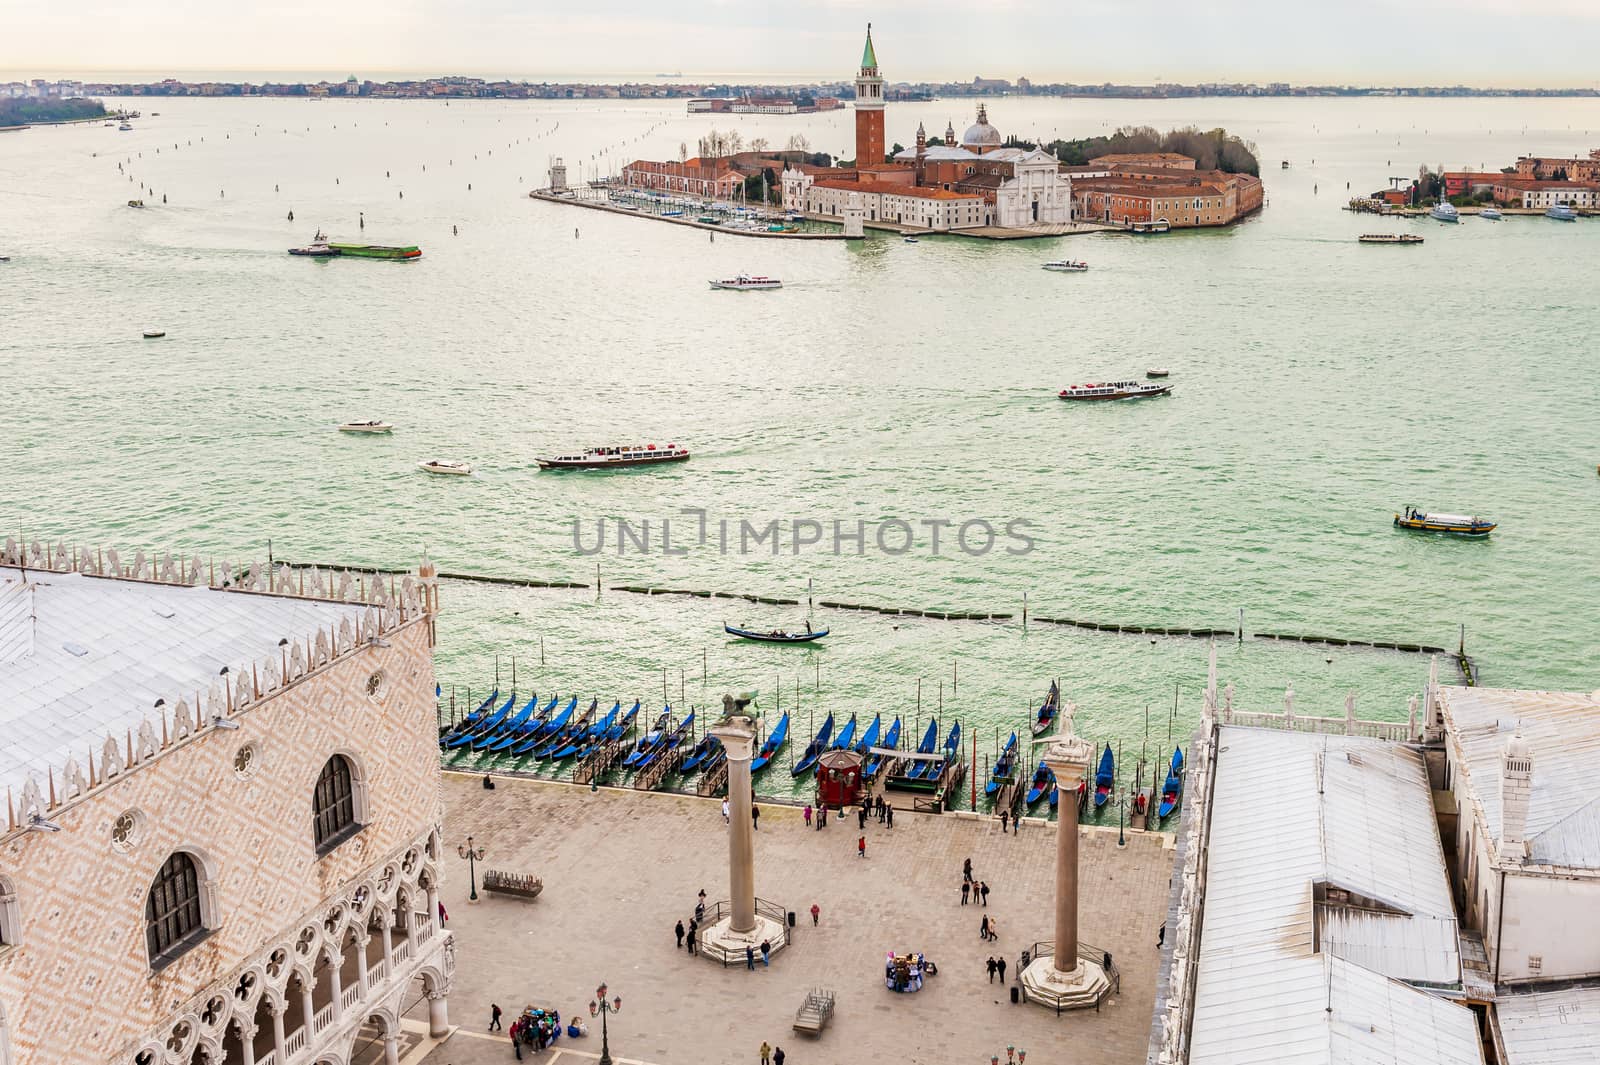 Aerial view of Saint Mark's Square and the gondolas, as well as the lagoon and the island of San Giorgio Maggiore, from the top of the bell tower of Saint Mark's Square in Venice.